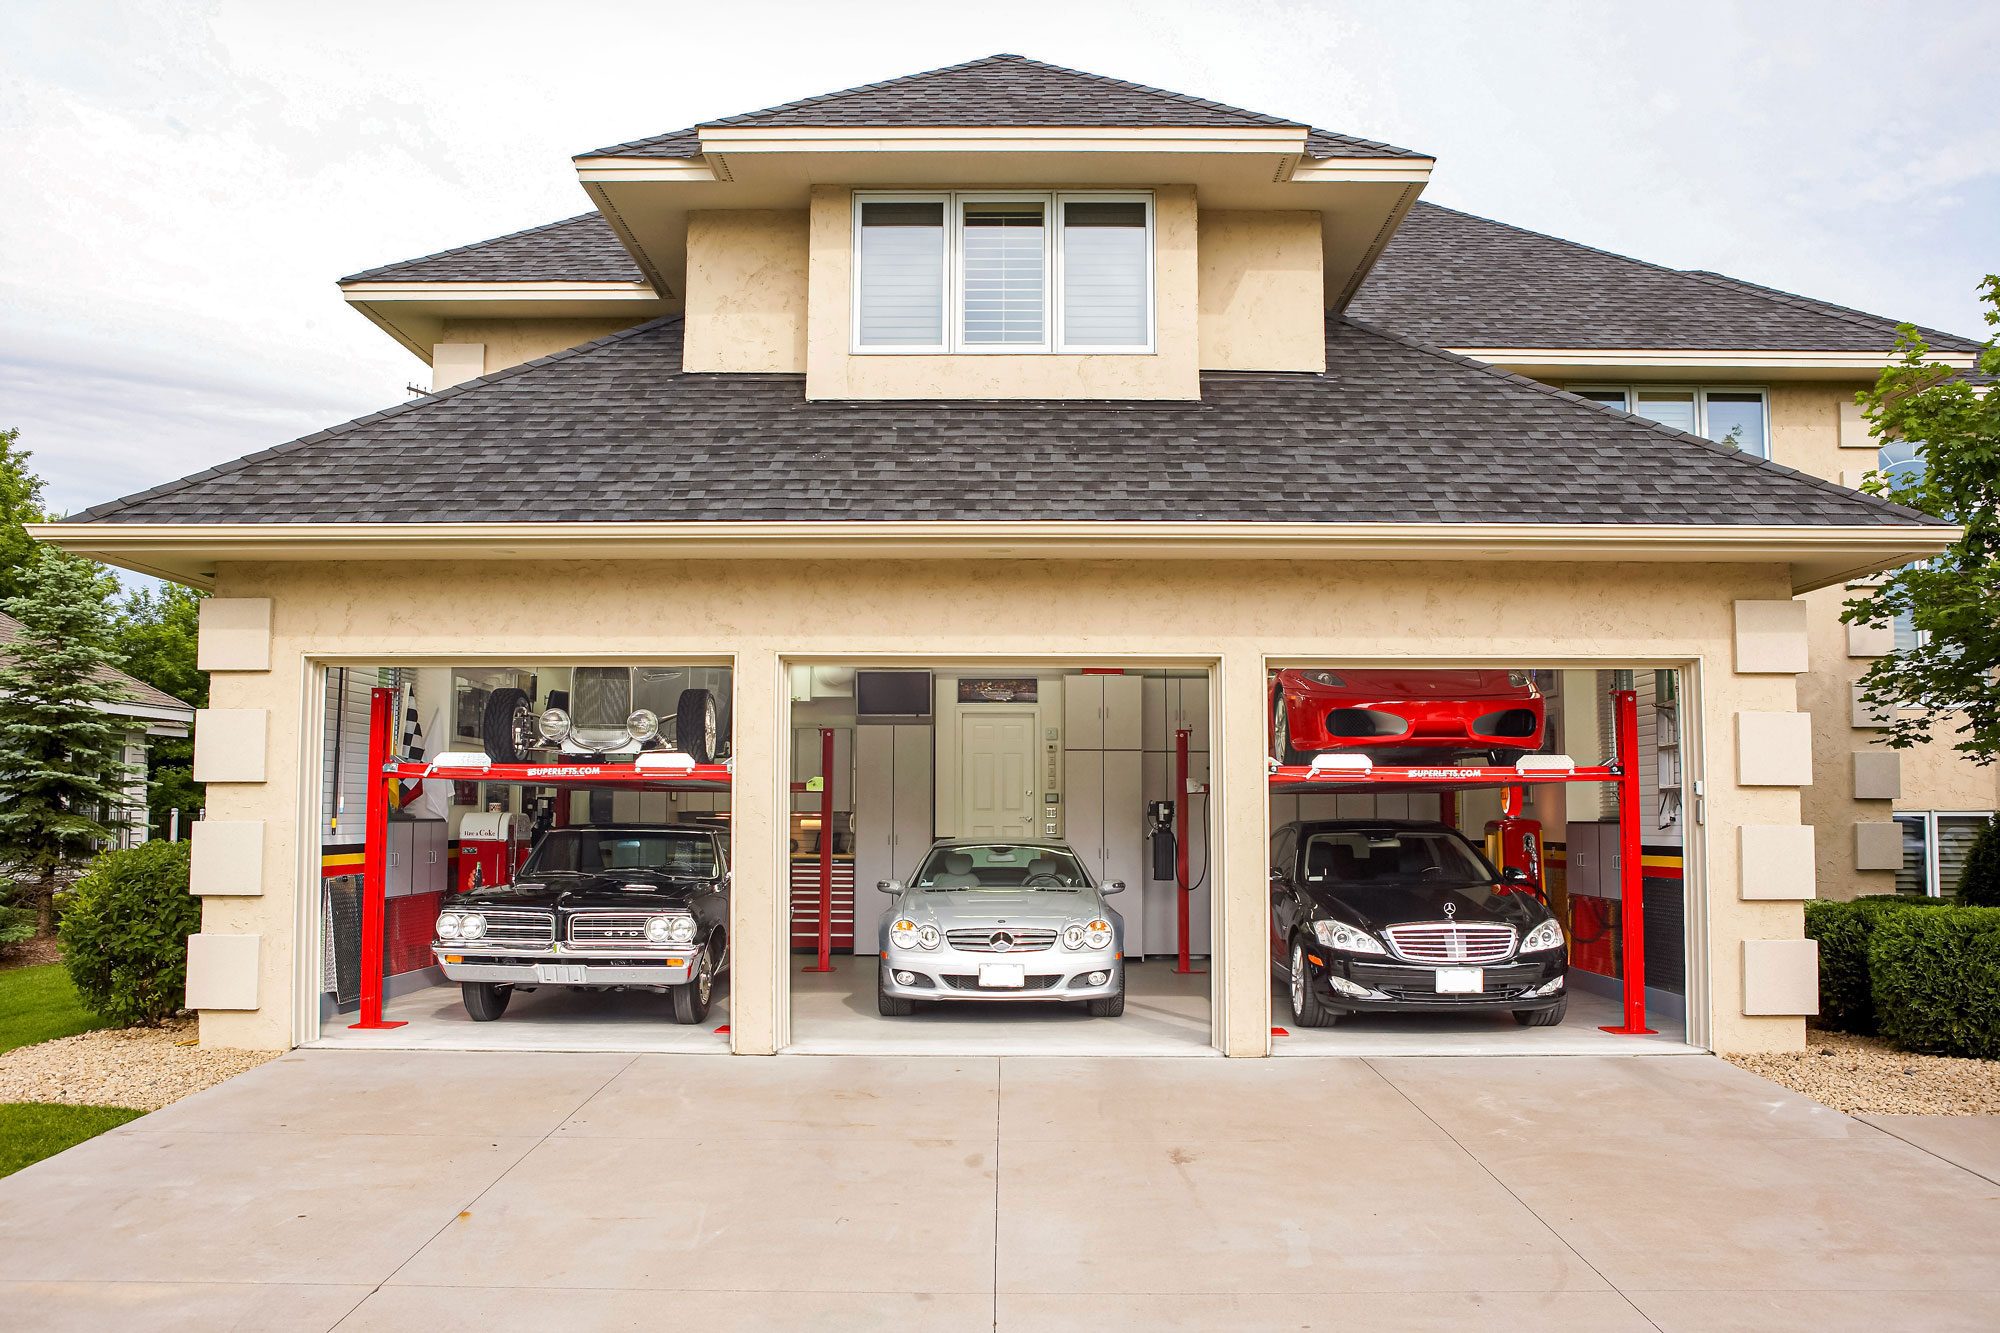 How Do You Fit Five Cars into a Three-Car Garage?